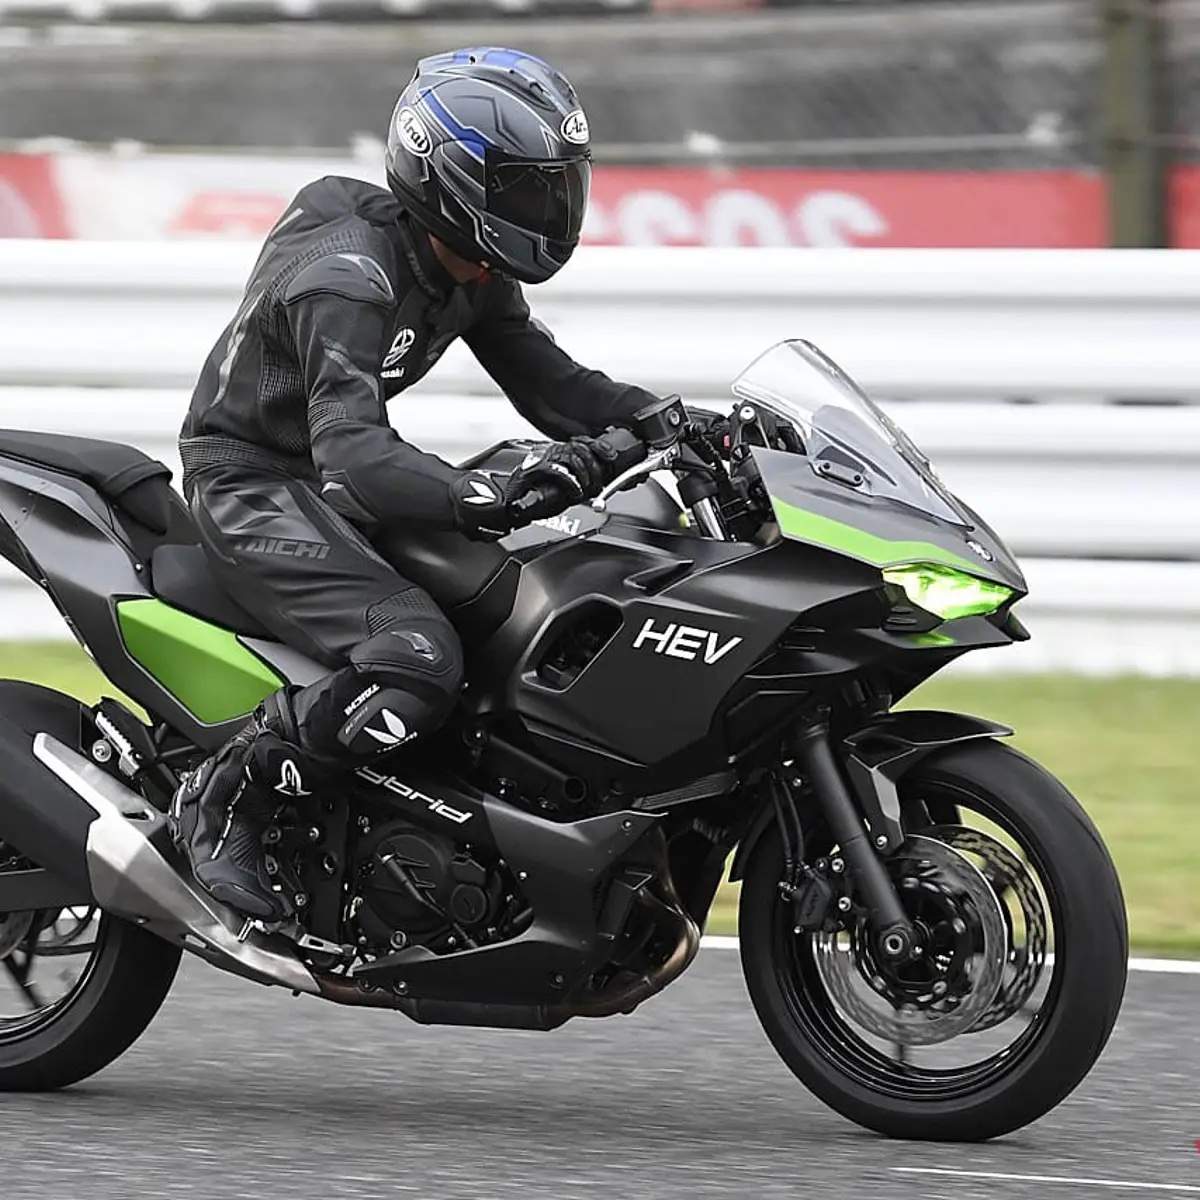 A view of Kawasaki's upcoming hybrid motorcycle. Media sourced from CycleWorld.